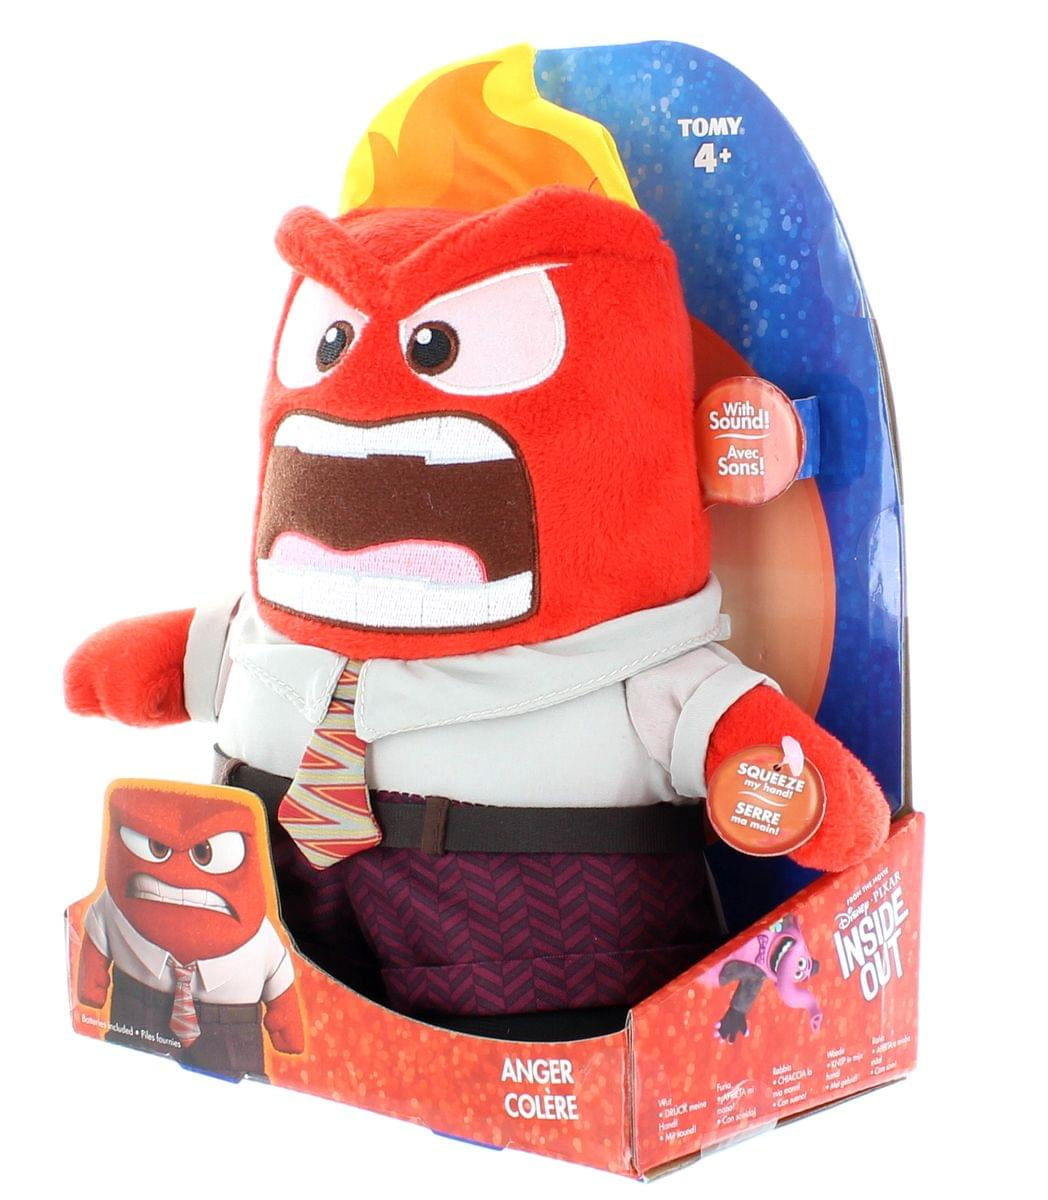 Details about   Disney/Pixar Inside Out Anger 6.5" Plush Toy/Doll TOMY NWT 